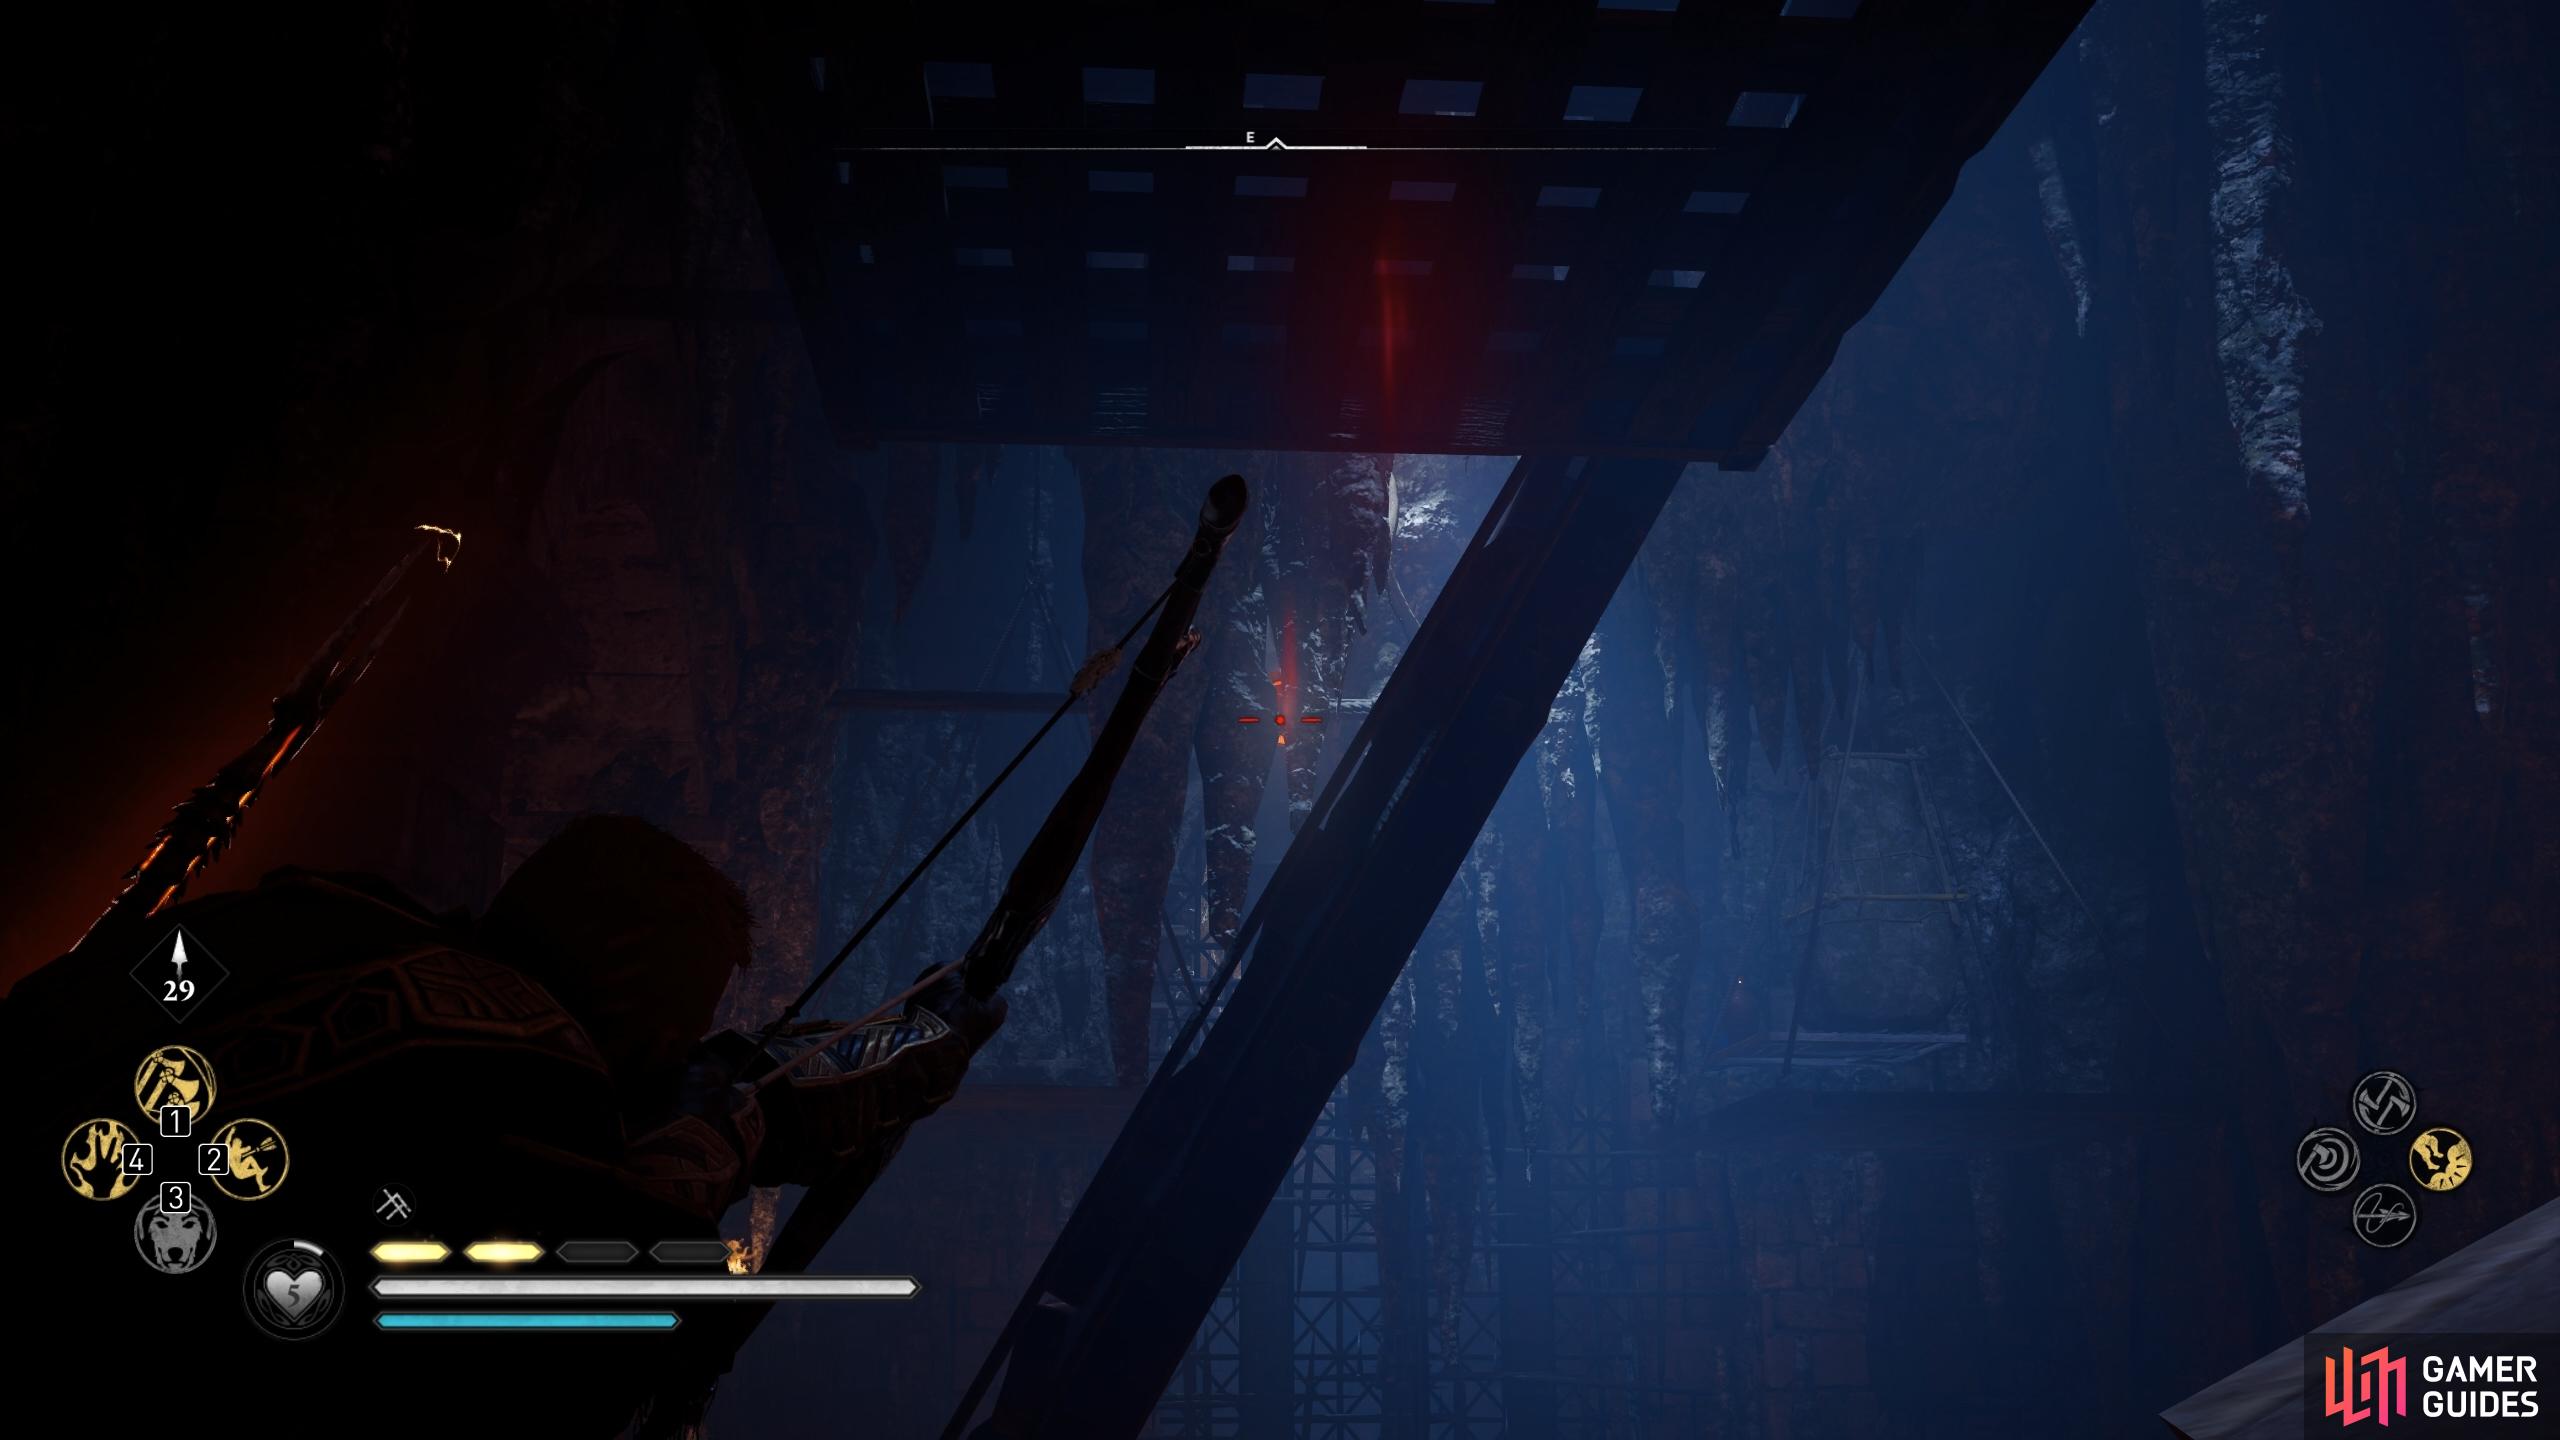 You can shoot the further bridge link from on top of the stone structure.